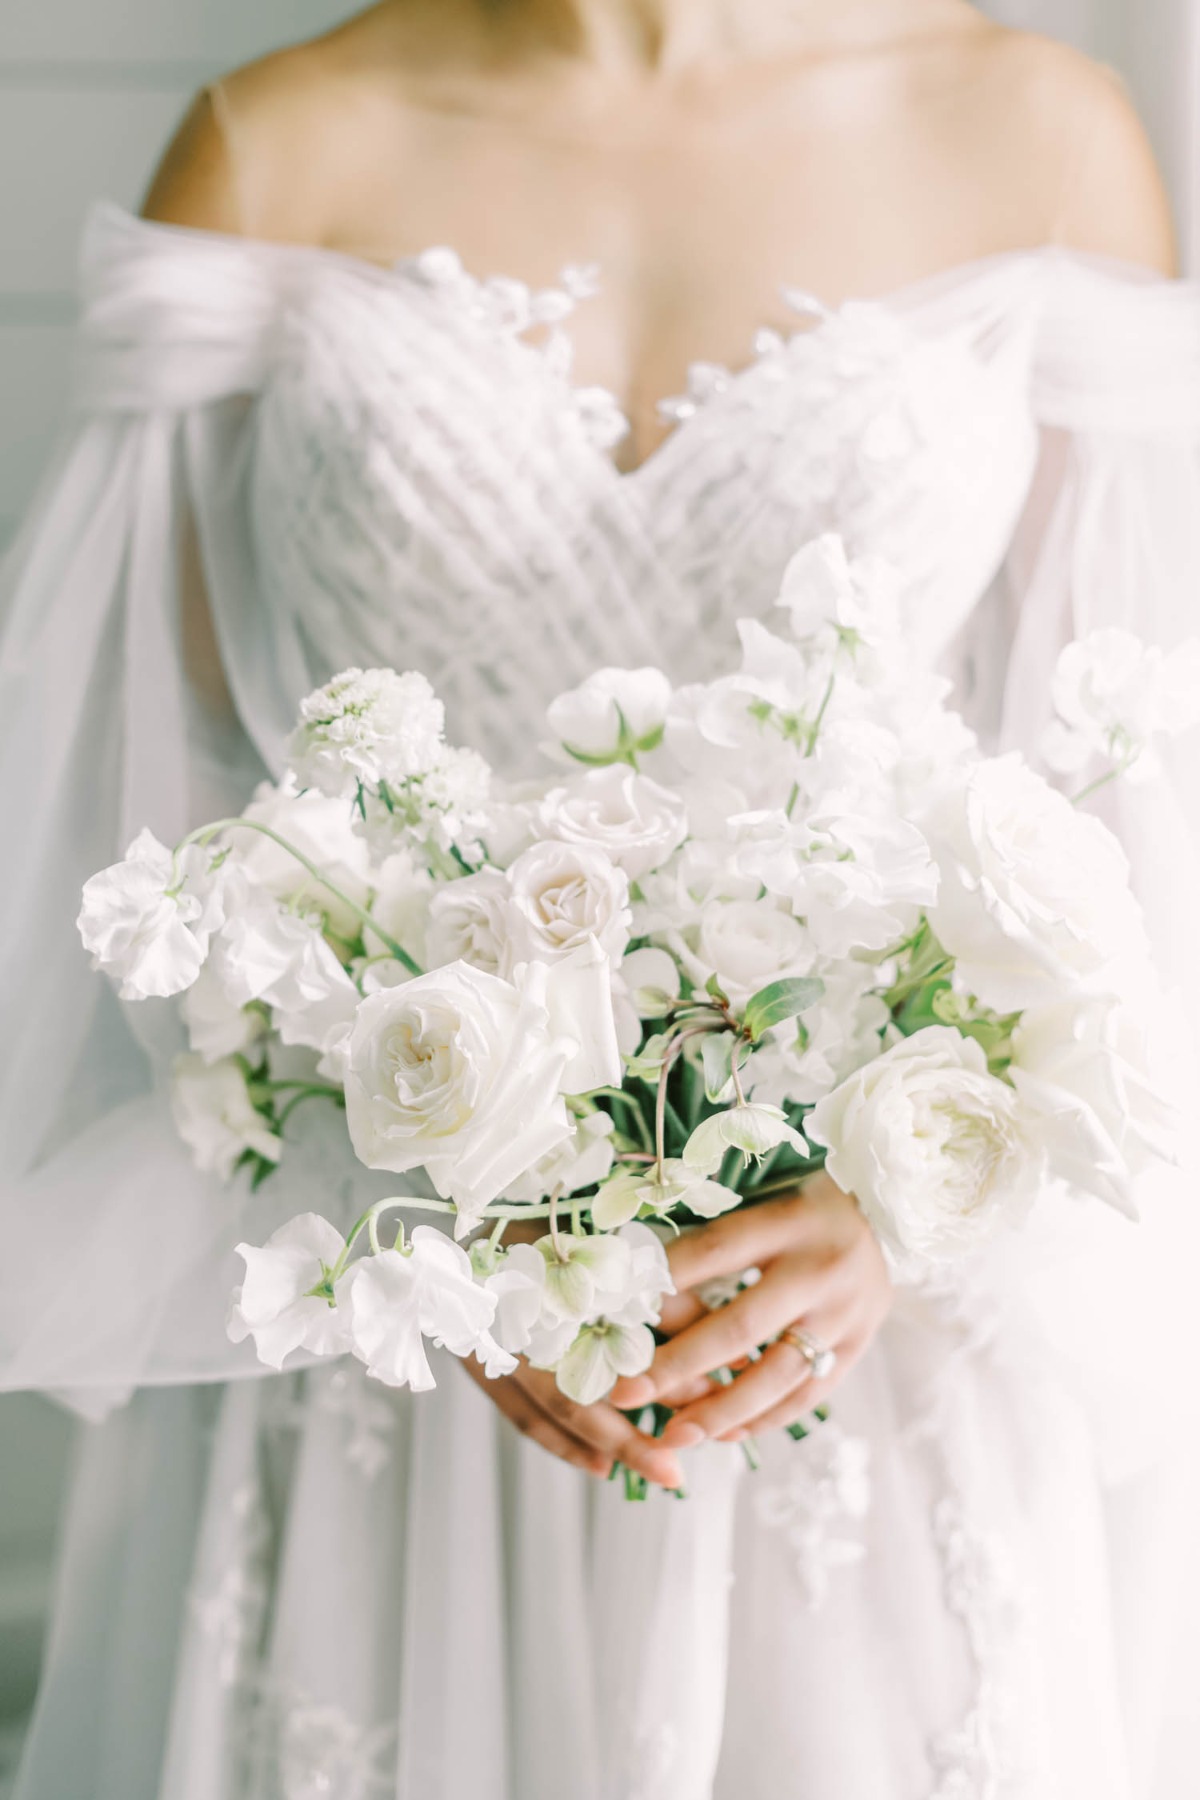 Intimate Farmhouse Inspiration Shoot With Whimsical Florals